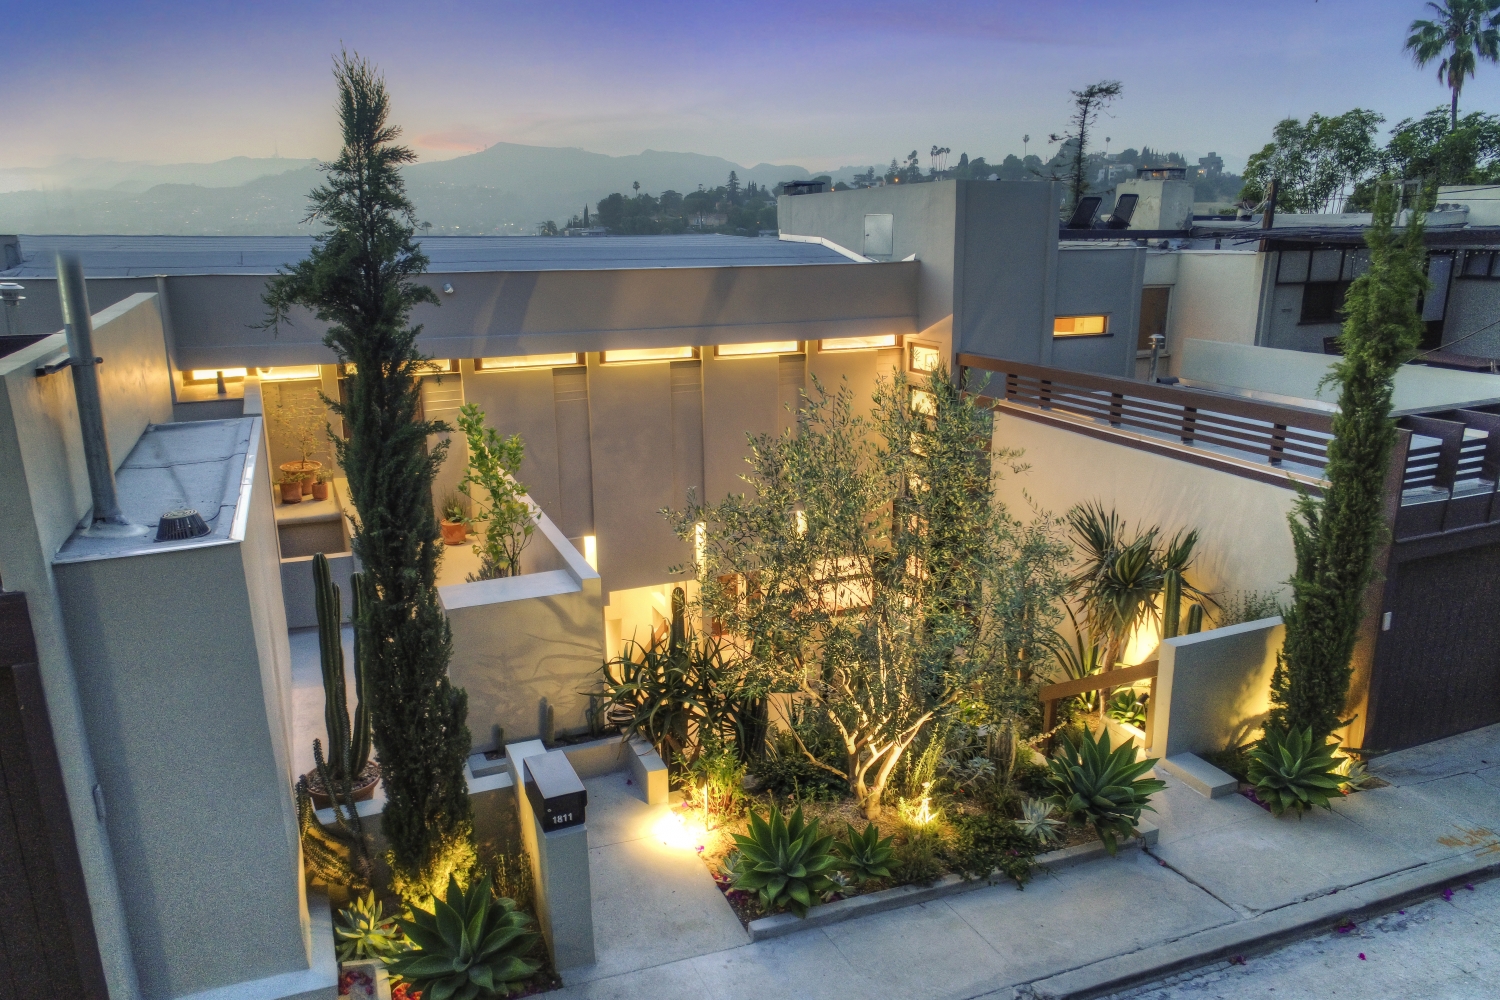 Overview of the Penthouse and adjacent cactus courtyard at Manola Court. 